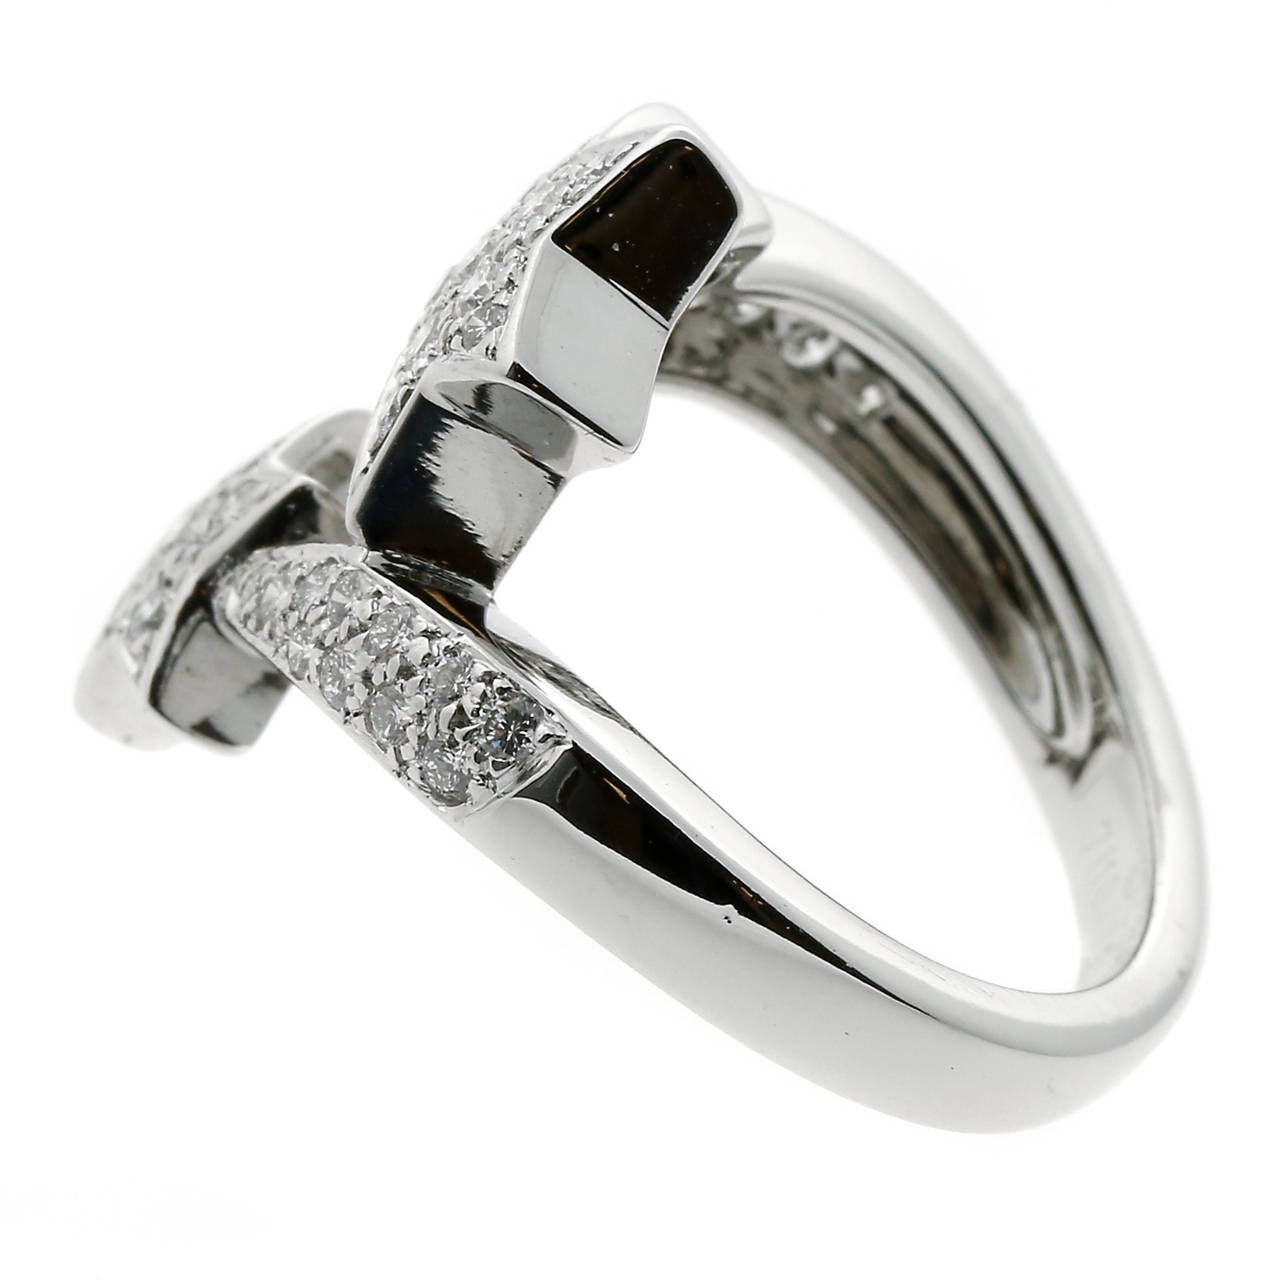 An astounding 39 Diamonds provide a dazzling degree of dynamism and brilliance to this 18k White Gold Ring by Chanel, forming the basis of two shooting stars which pass each other by at opposing ends of the Ring. For the dreamer who looks up at the